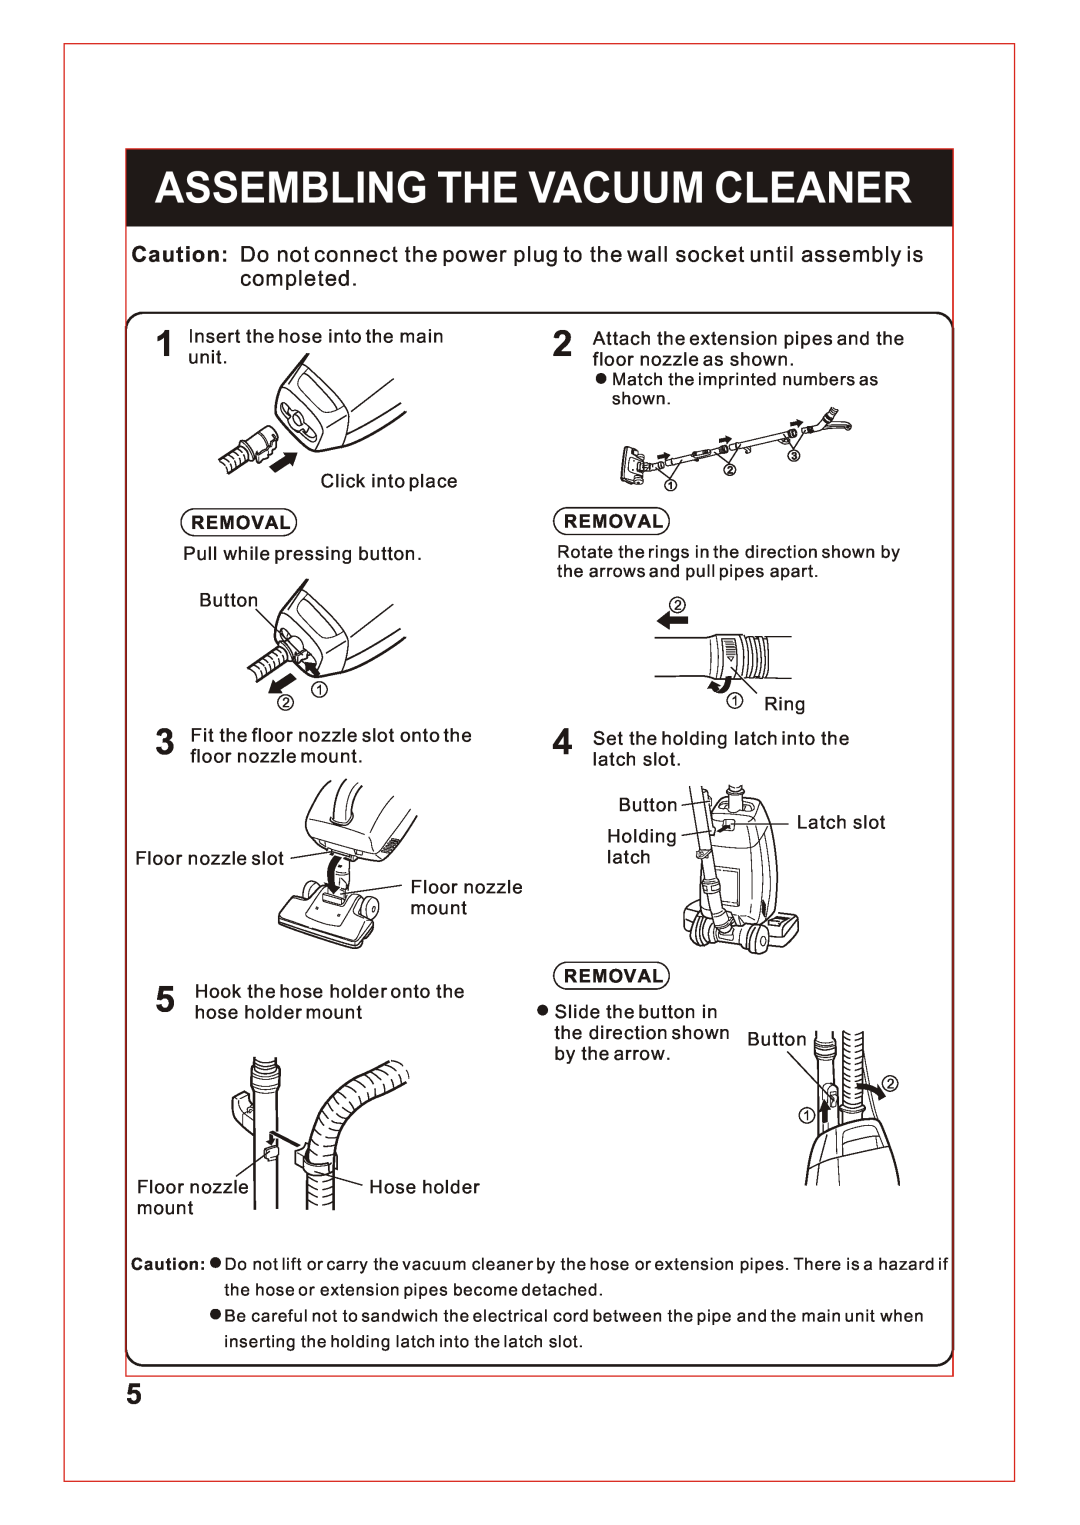 Sanyo SC-180, SC-150 instruction manual Assembling The Vacuum Cleaner, completed, Removal 